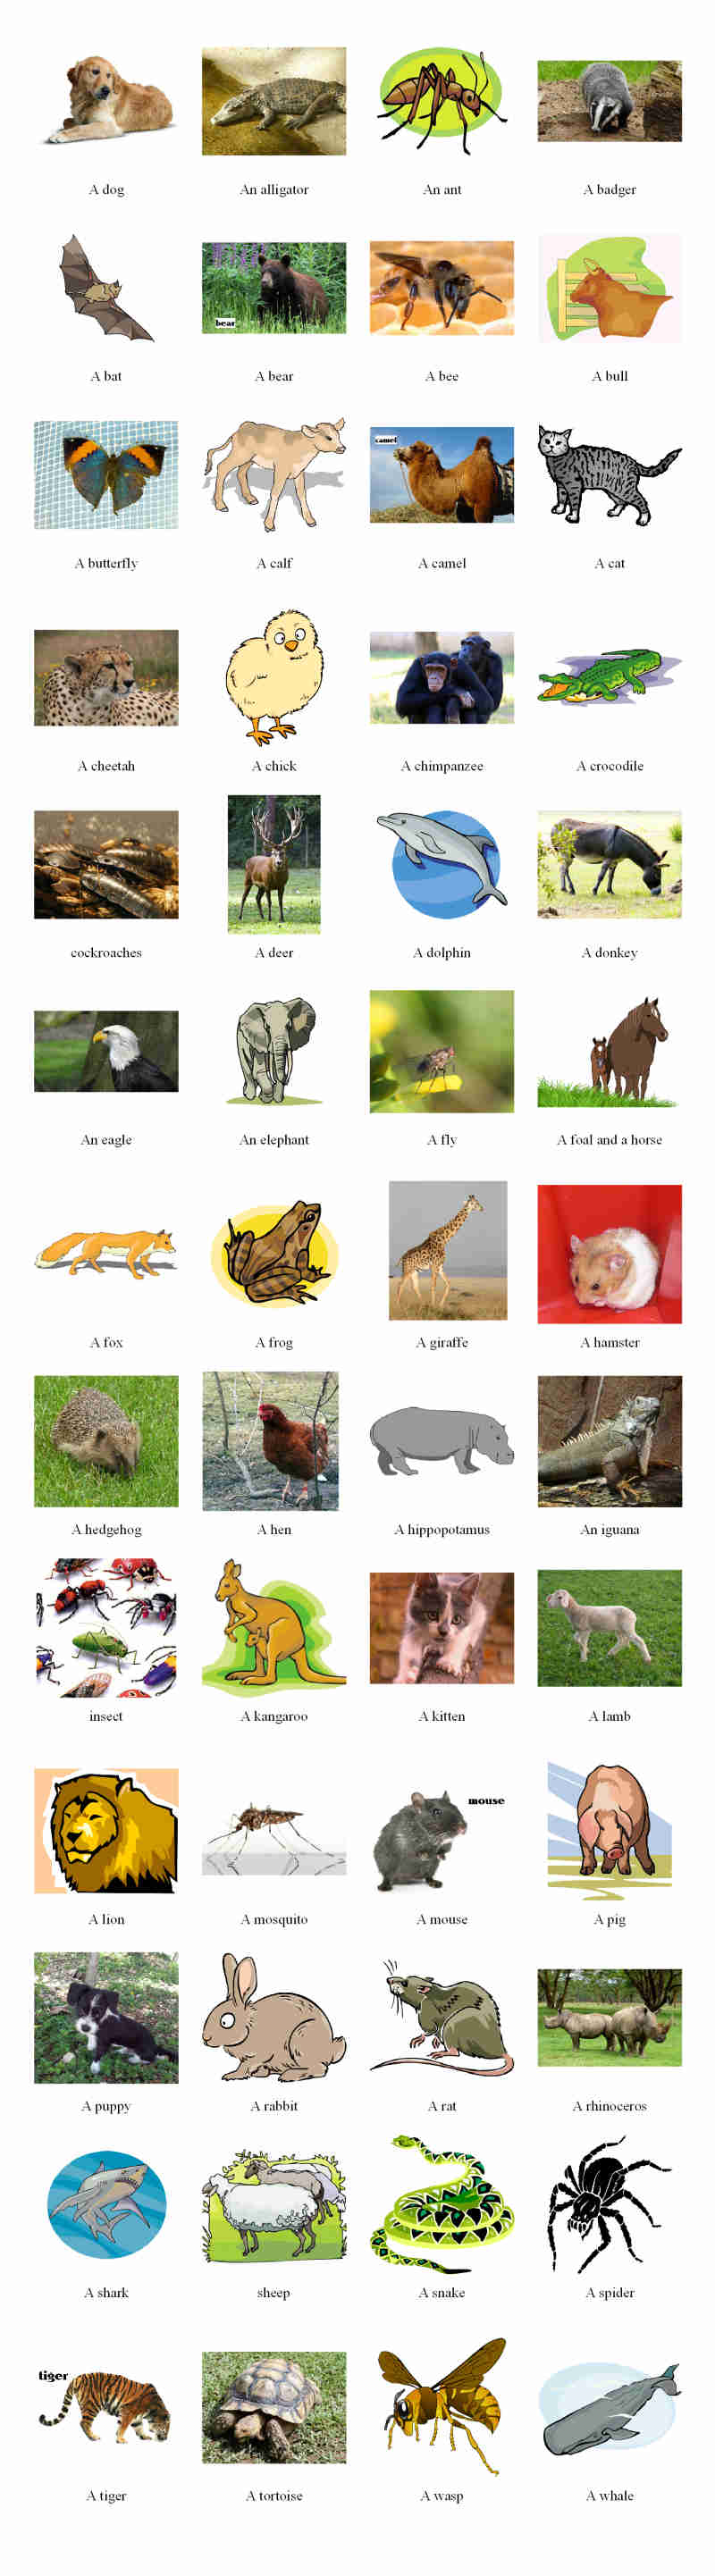 Animals vocabulary - learn the names of 50 animals - Games to learn English